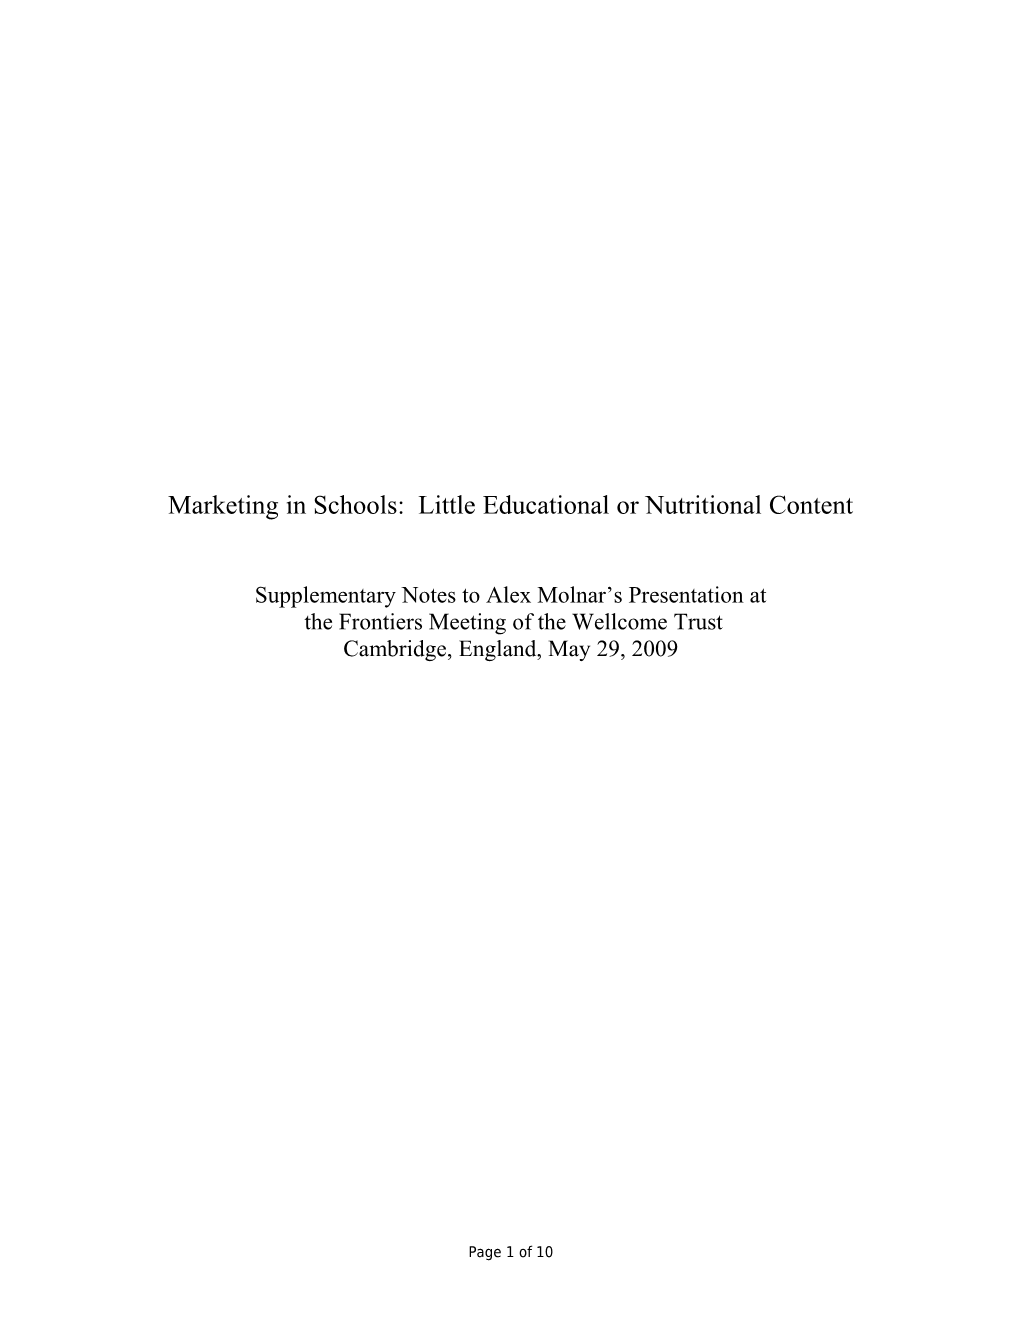 Why Are Marketers Interested in Schools